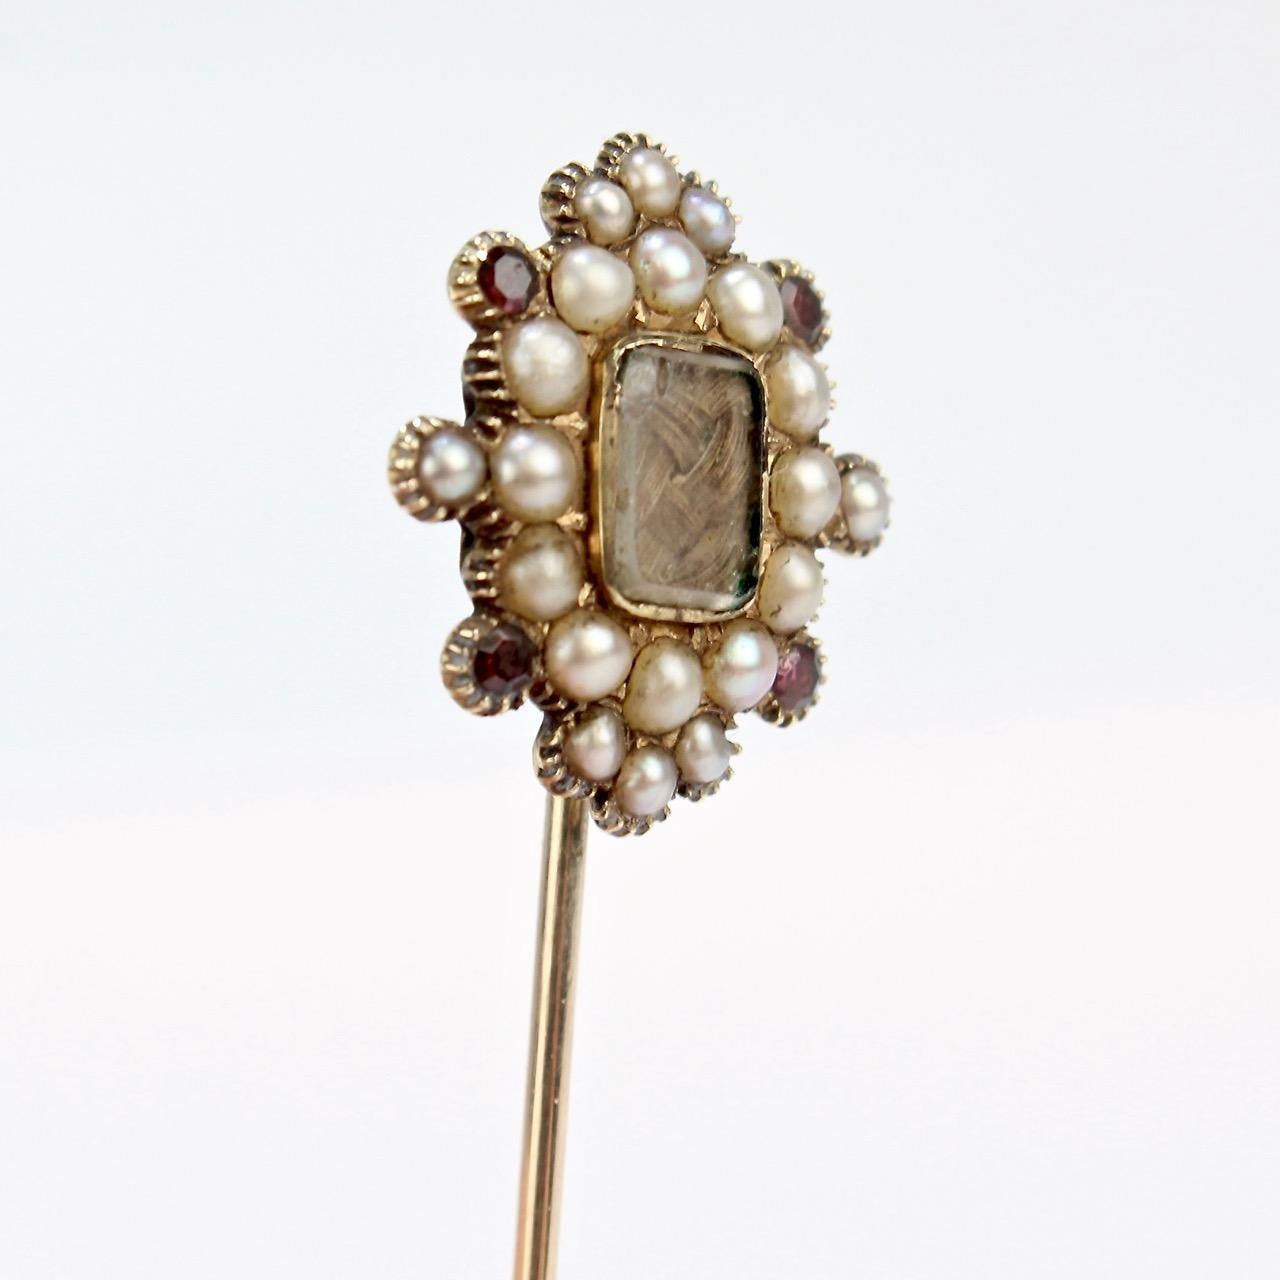 Antique Georgian Mourning Stick Pin with Gold, Pearls, and Garnets In Good Condition For Sale In Philadelphia, PA